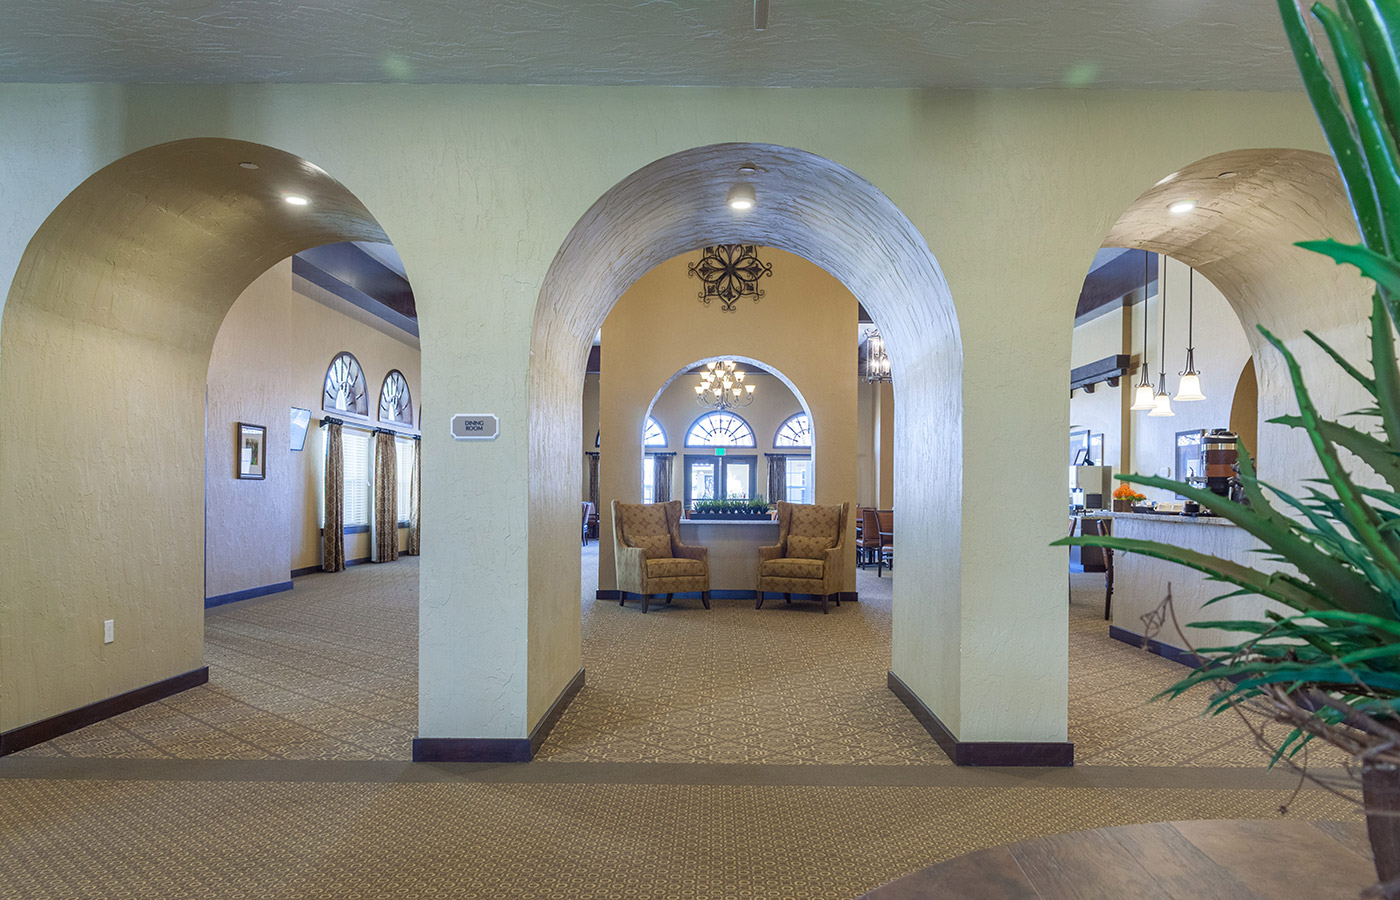 A three arched doorway leading into a vast hall with two armchairs.